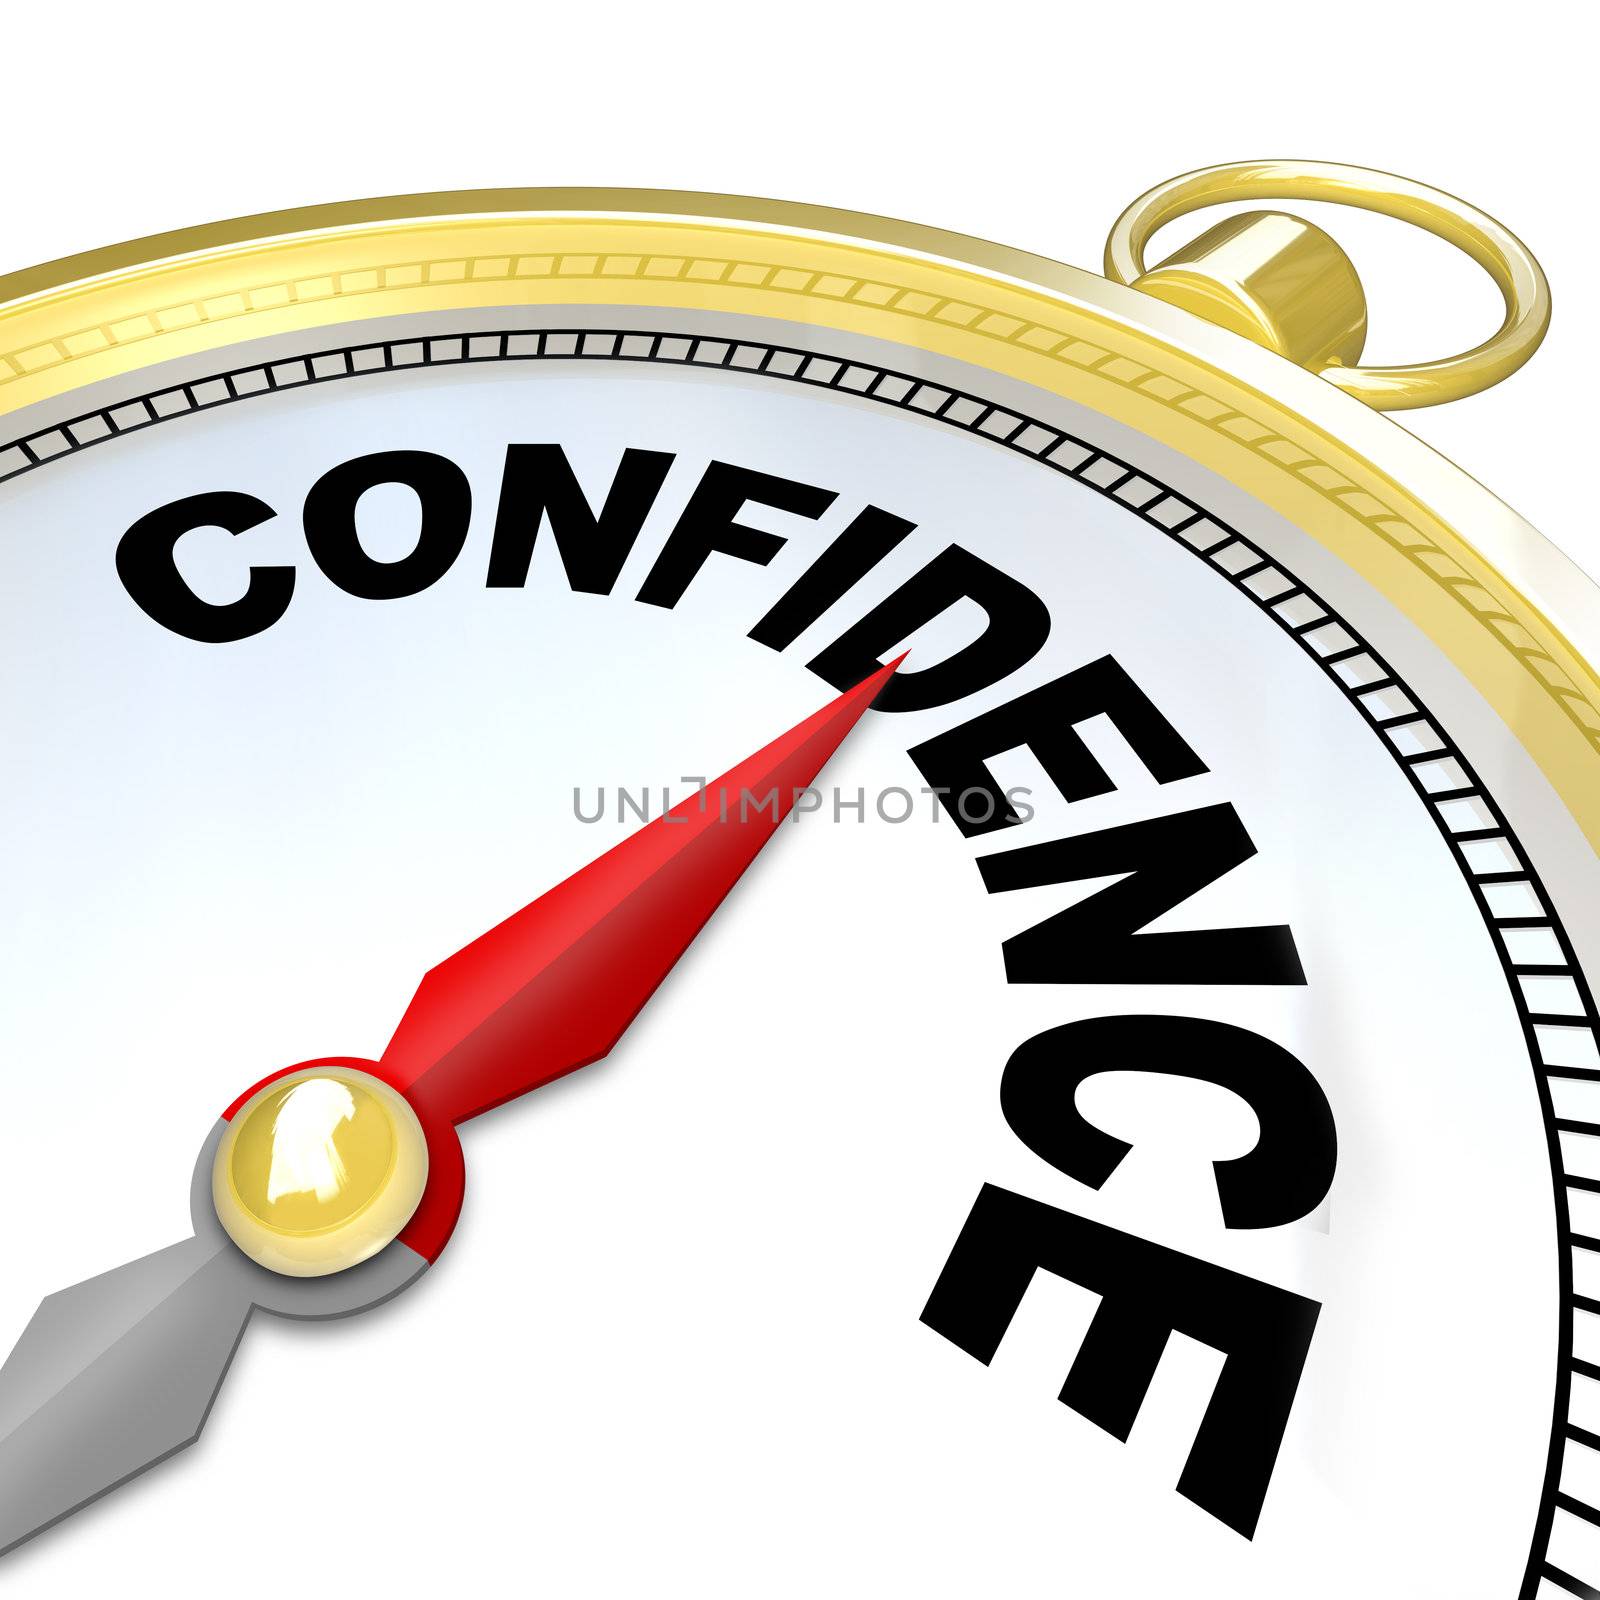 A compass with the word Confidence leads you to success by finding your inner strength needed to direct you to reaching your goals in life